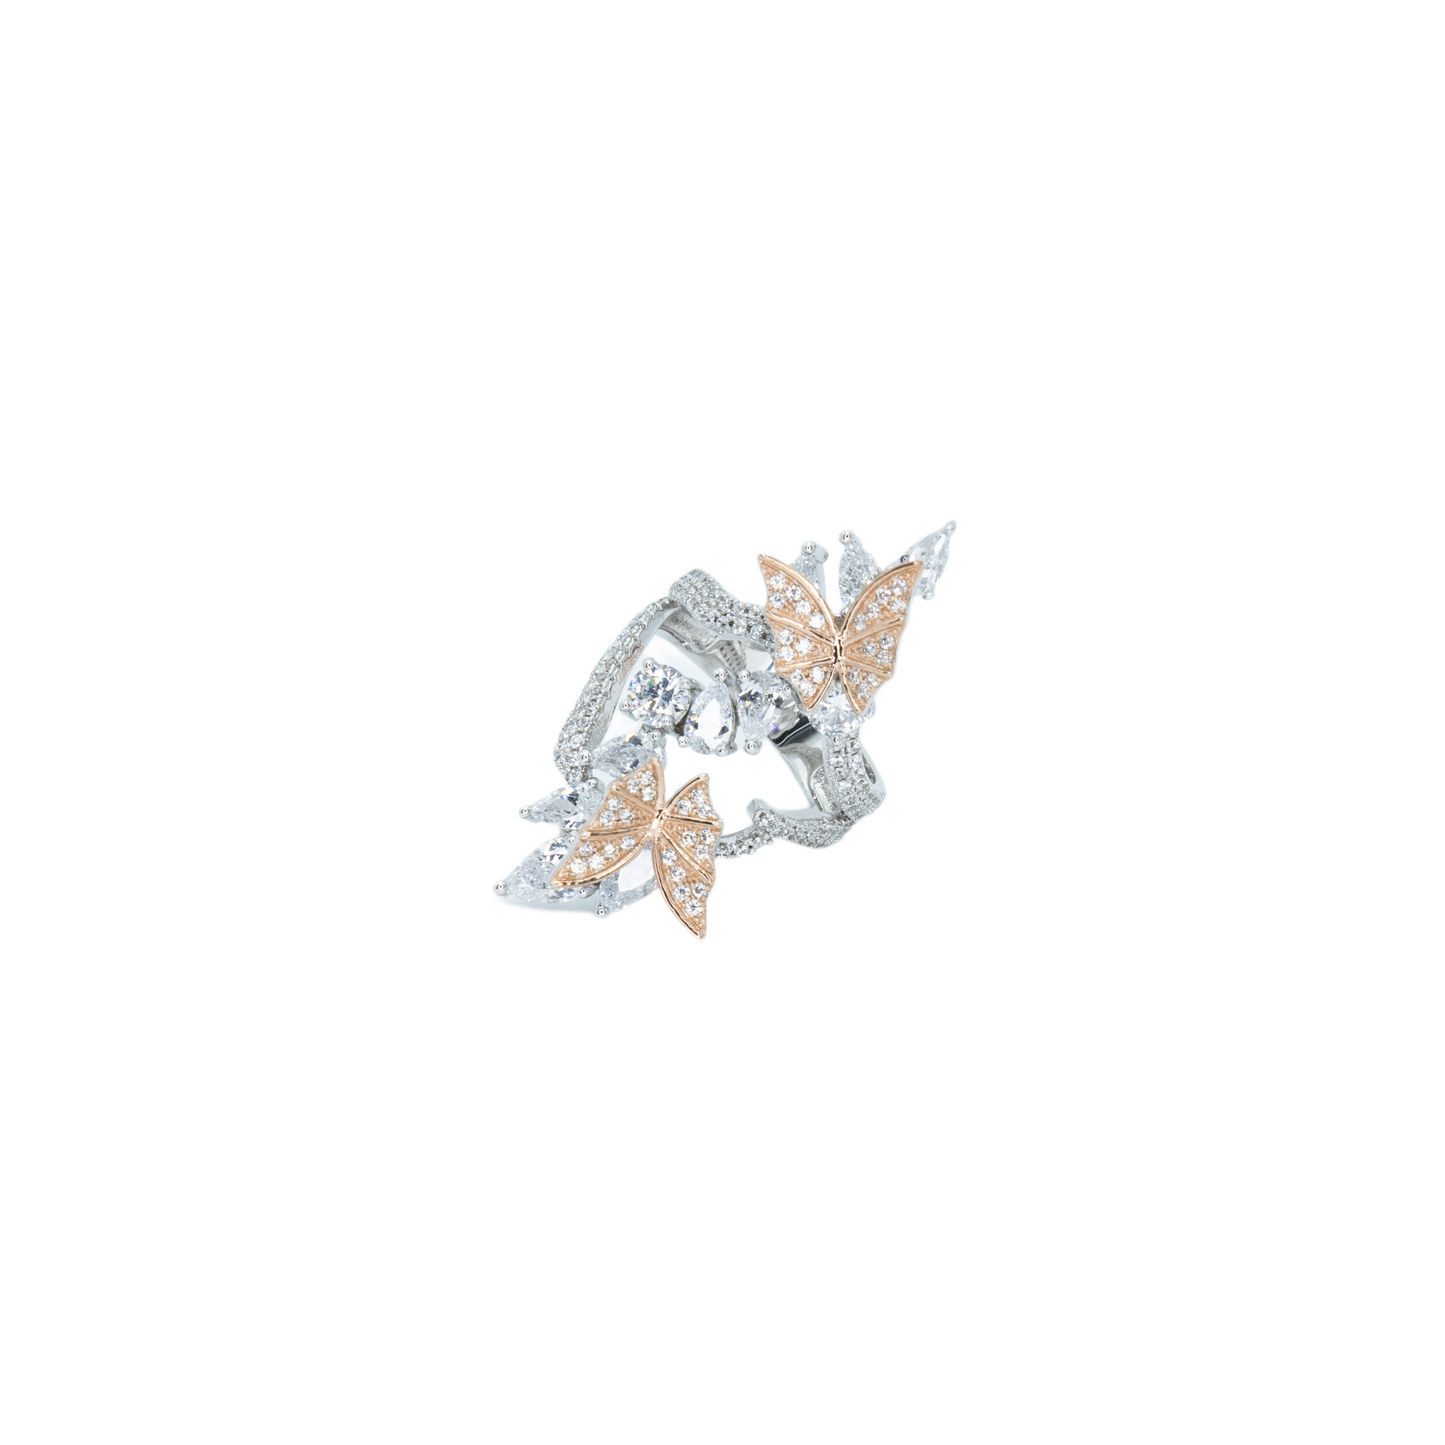 RG butterfly ring w/ 3A CZ stones rhodium plated